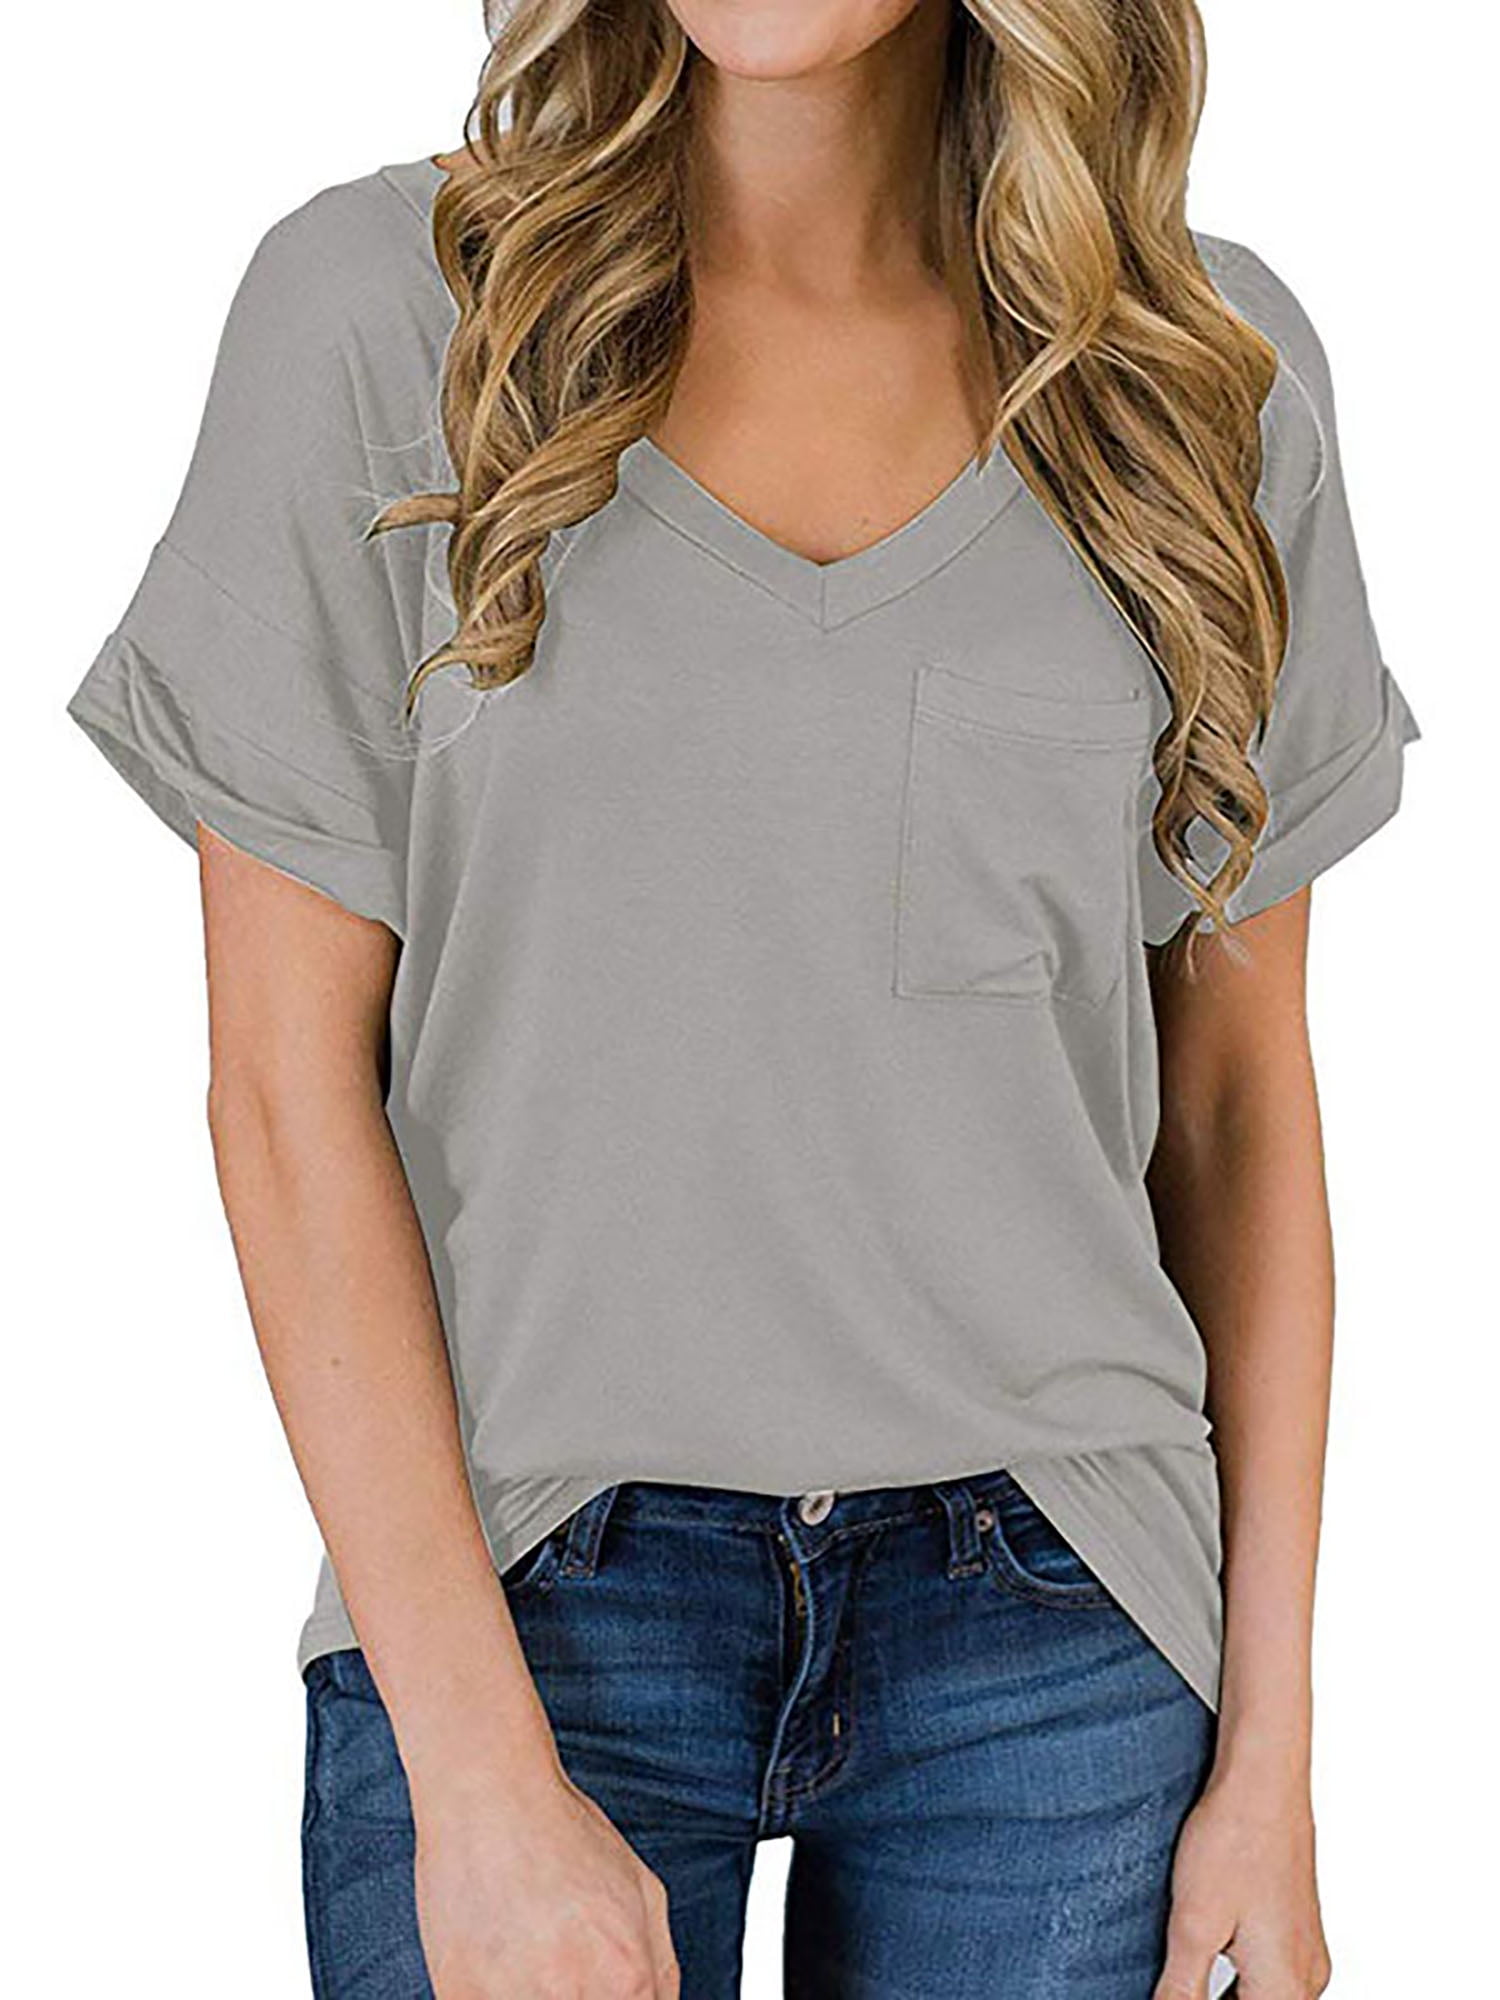 Short Sleeve Casual Solid Color Summer T Shirts Tops Loose Fits Tunic Tee with Pocket